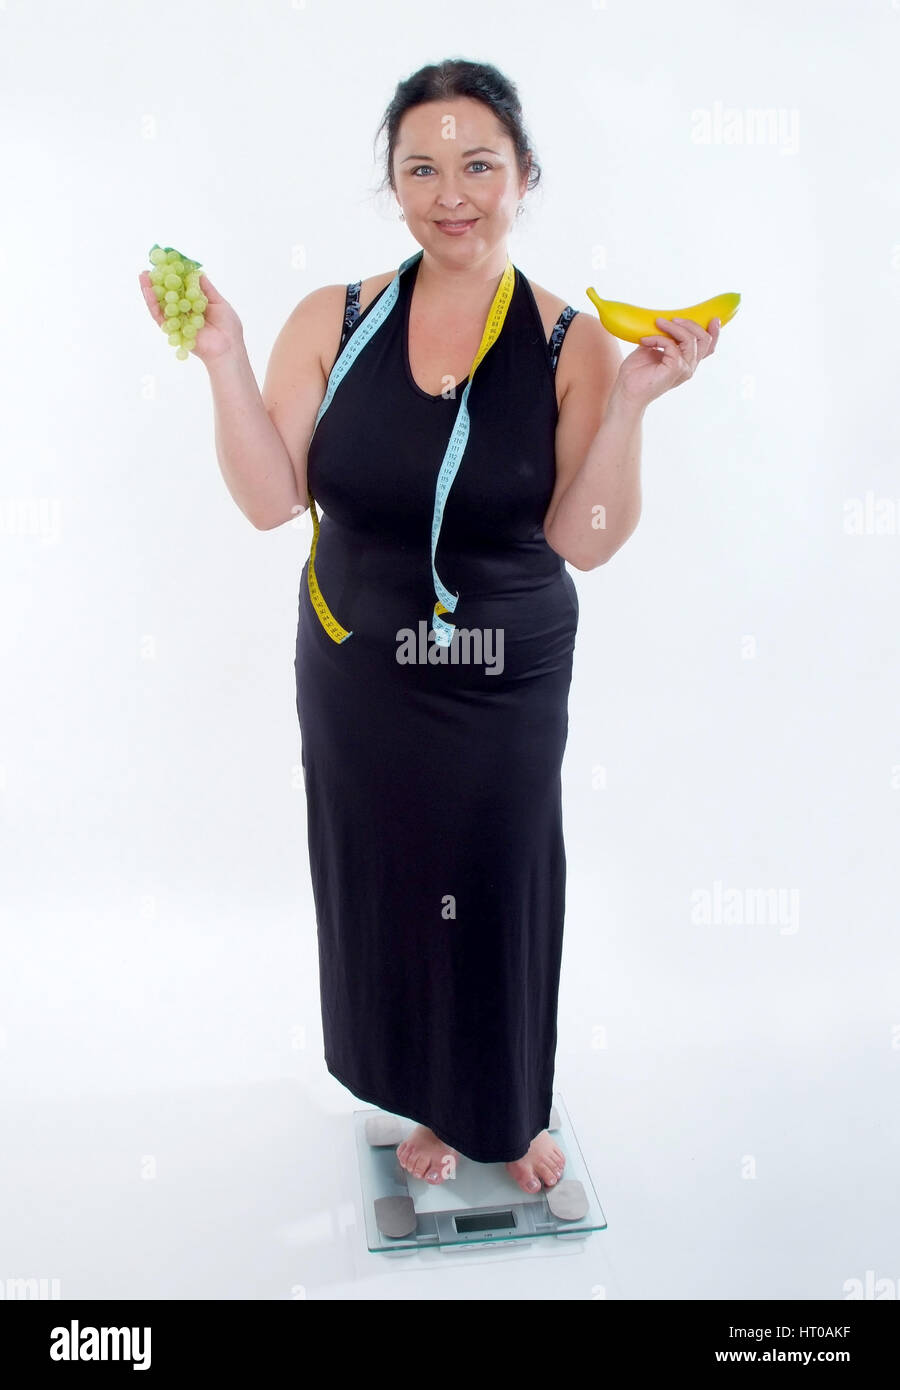 Selbstbewusste, mollige Frau steht mit Obst auf der Waage - chubby woman with fruits on scale Stock Photo